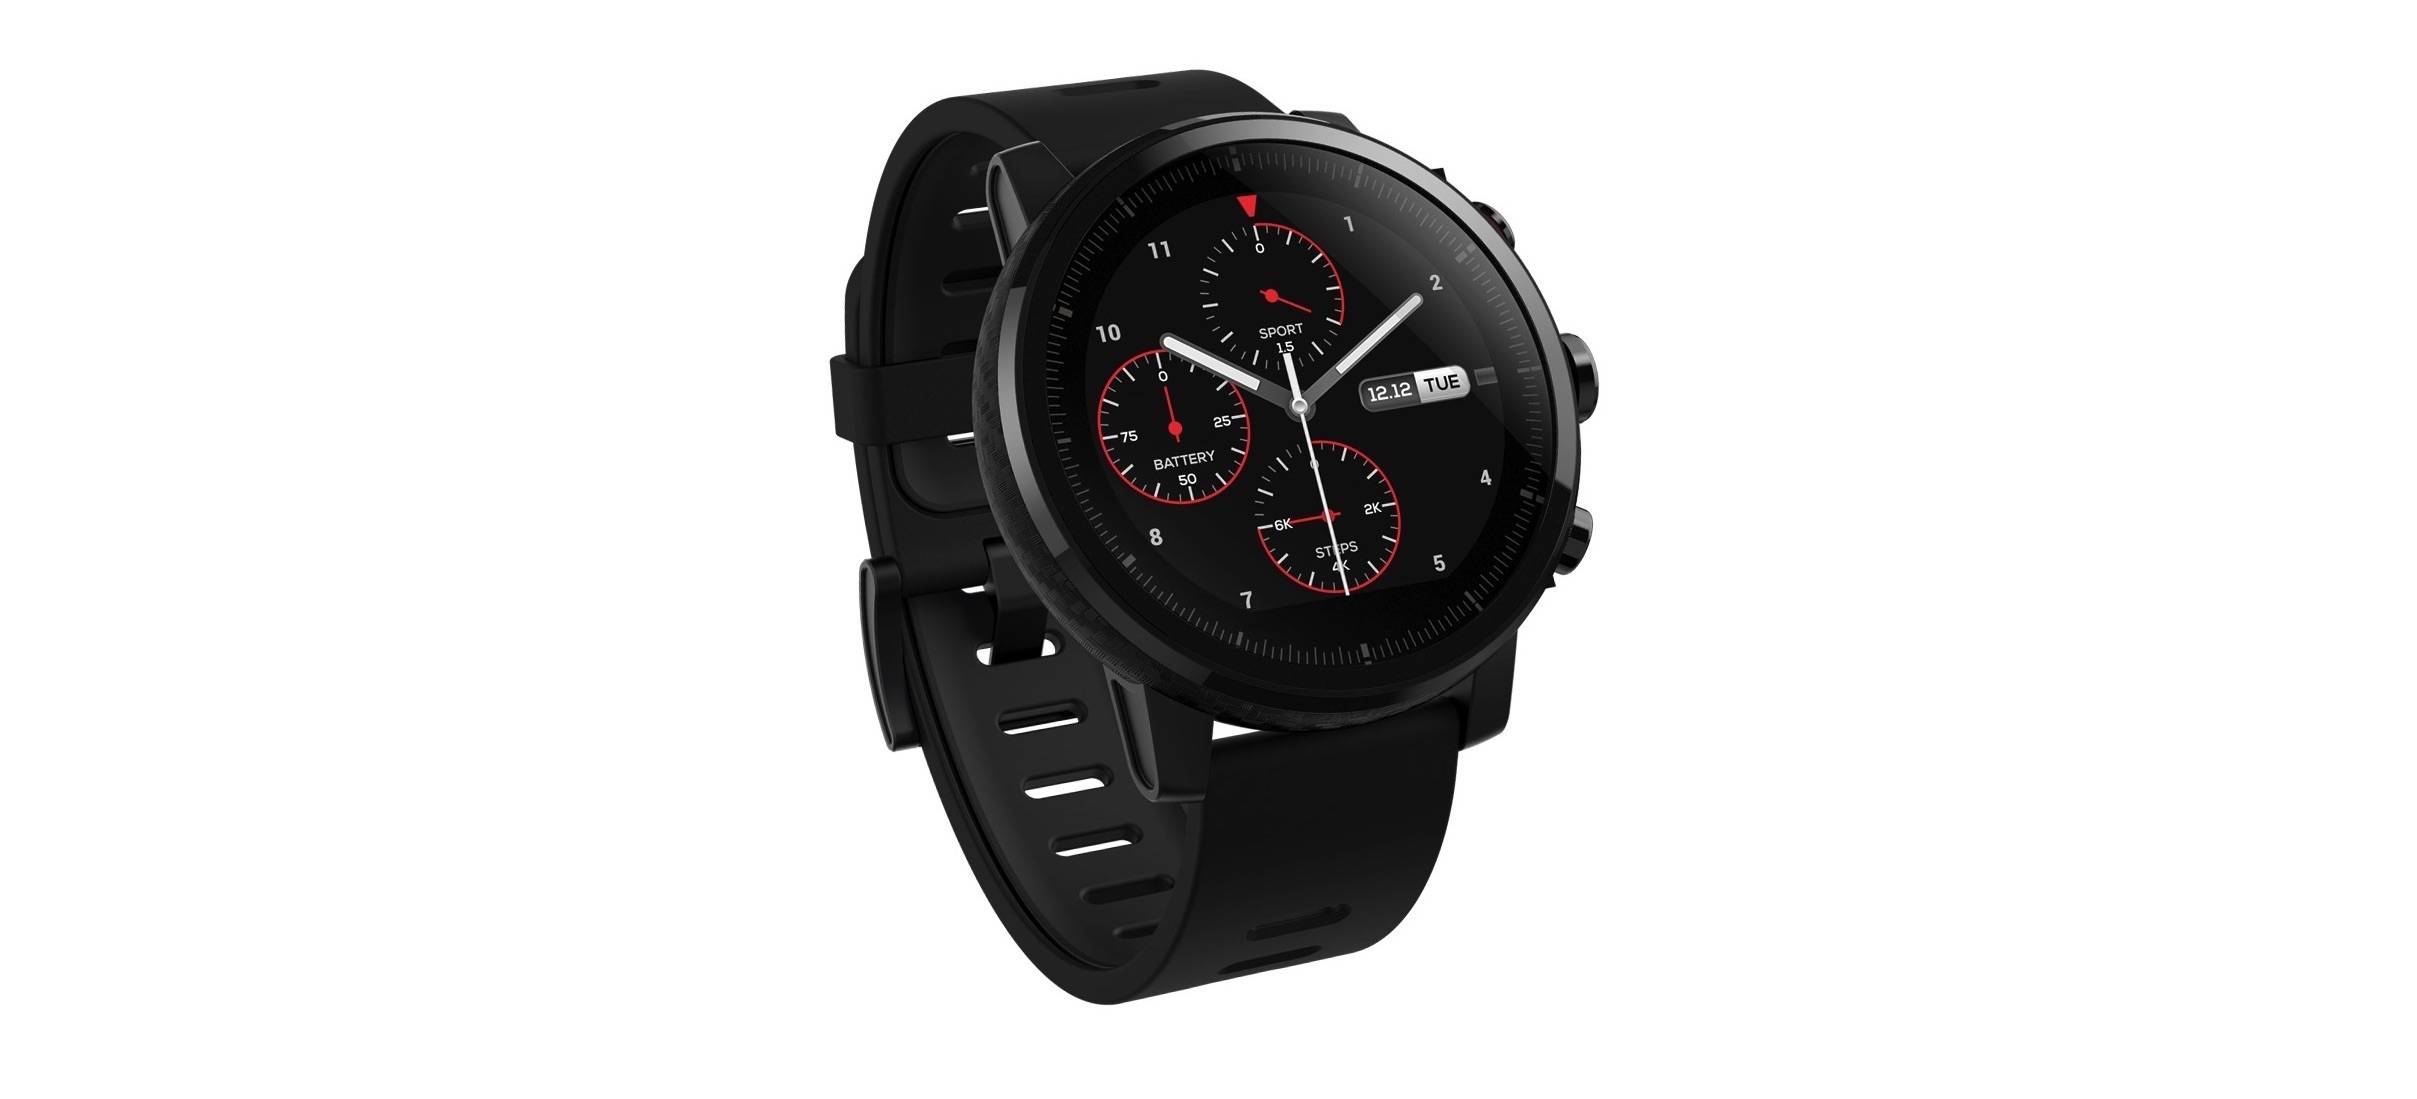 amazfit stratos android wear